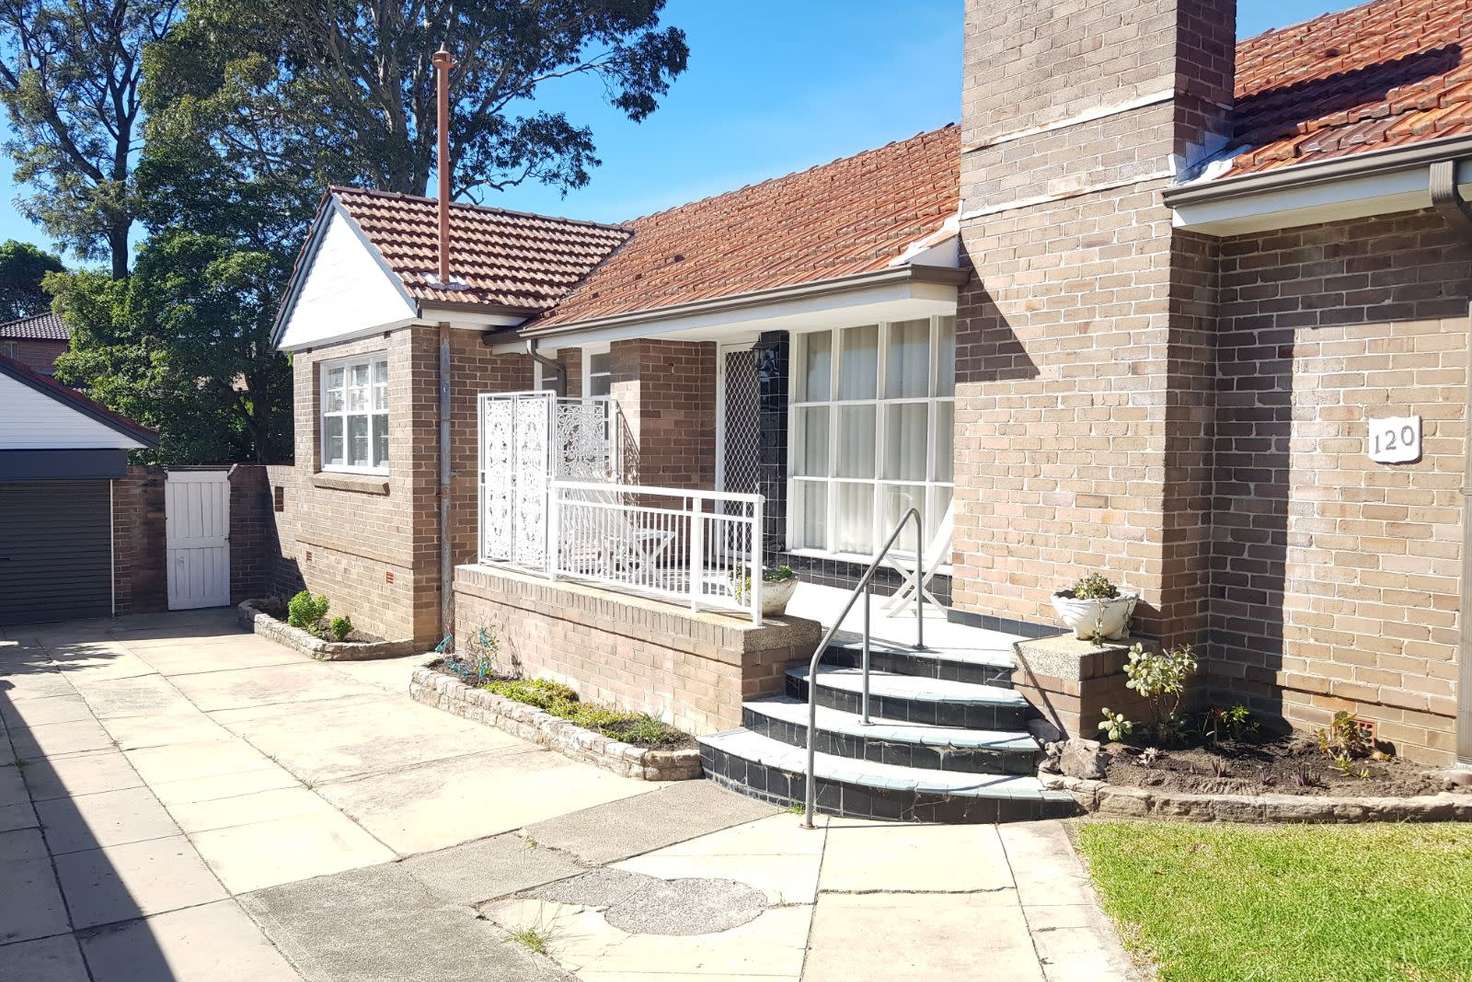 Main view of Homely house listing, 120 Bexley Road, Earlwood NSW 2206